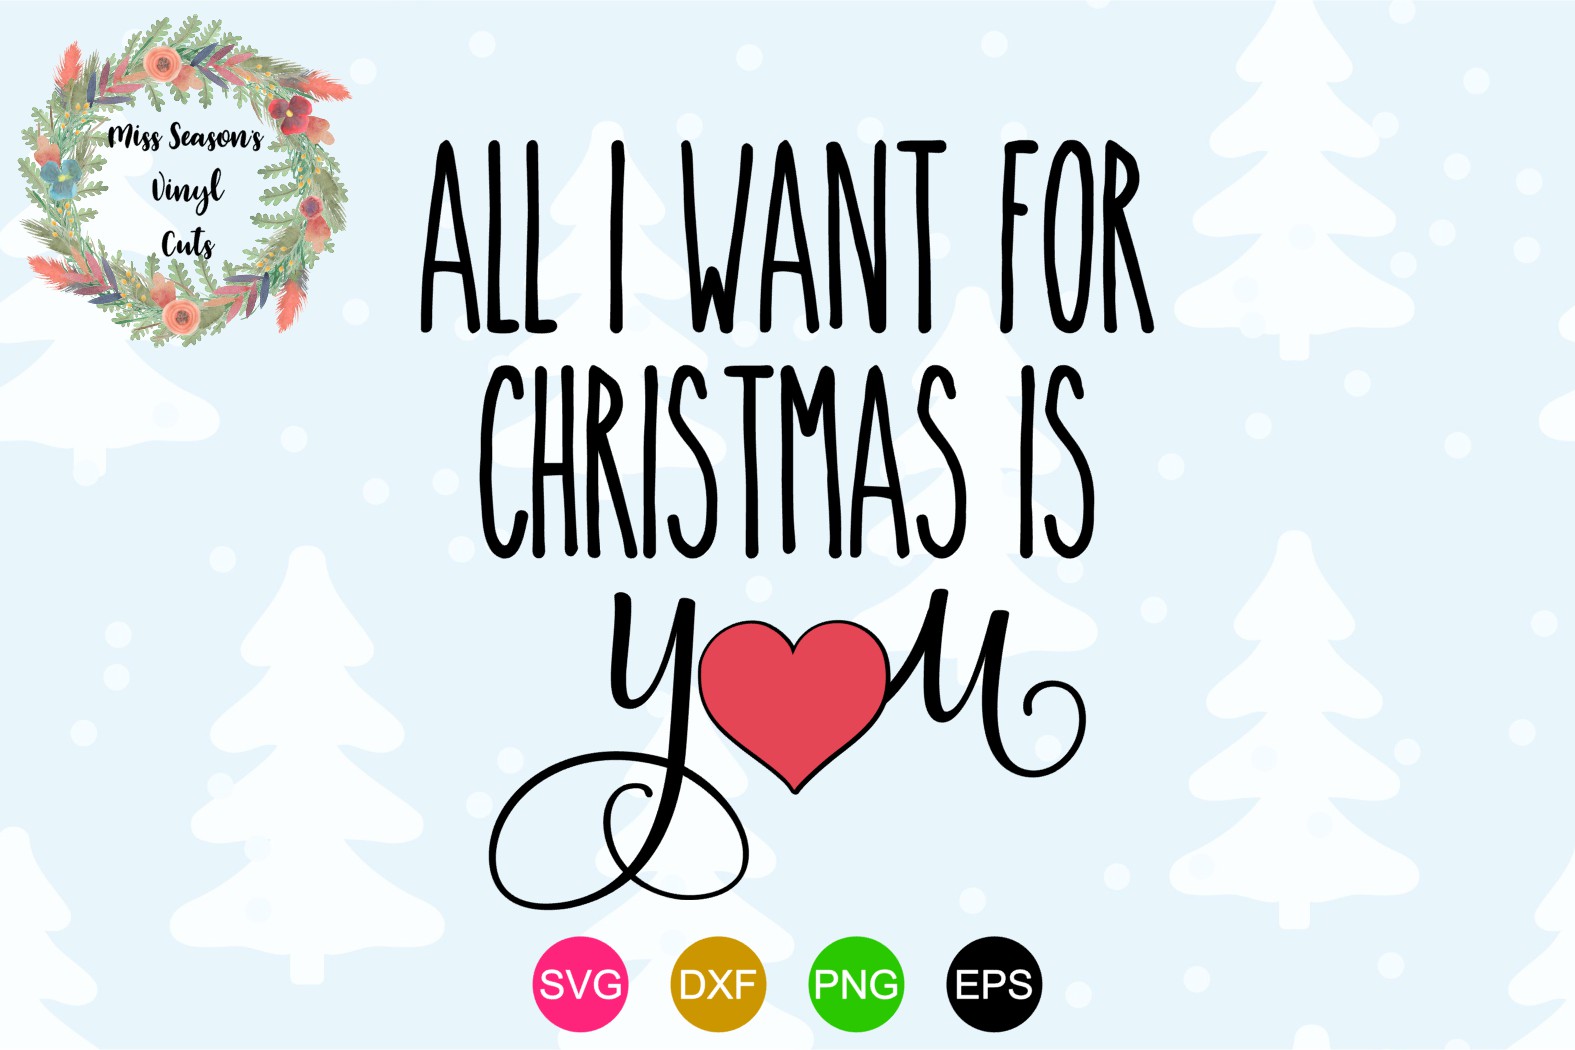 All I want for Christmas is you SVG - Christmas (320130) | SVGs